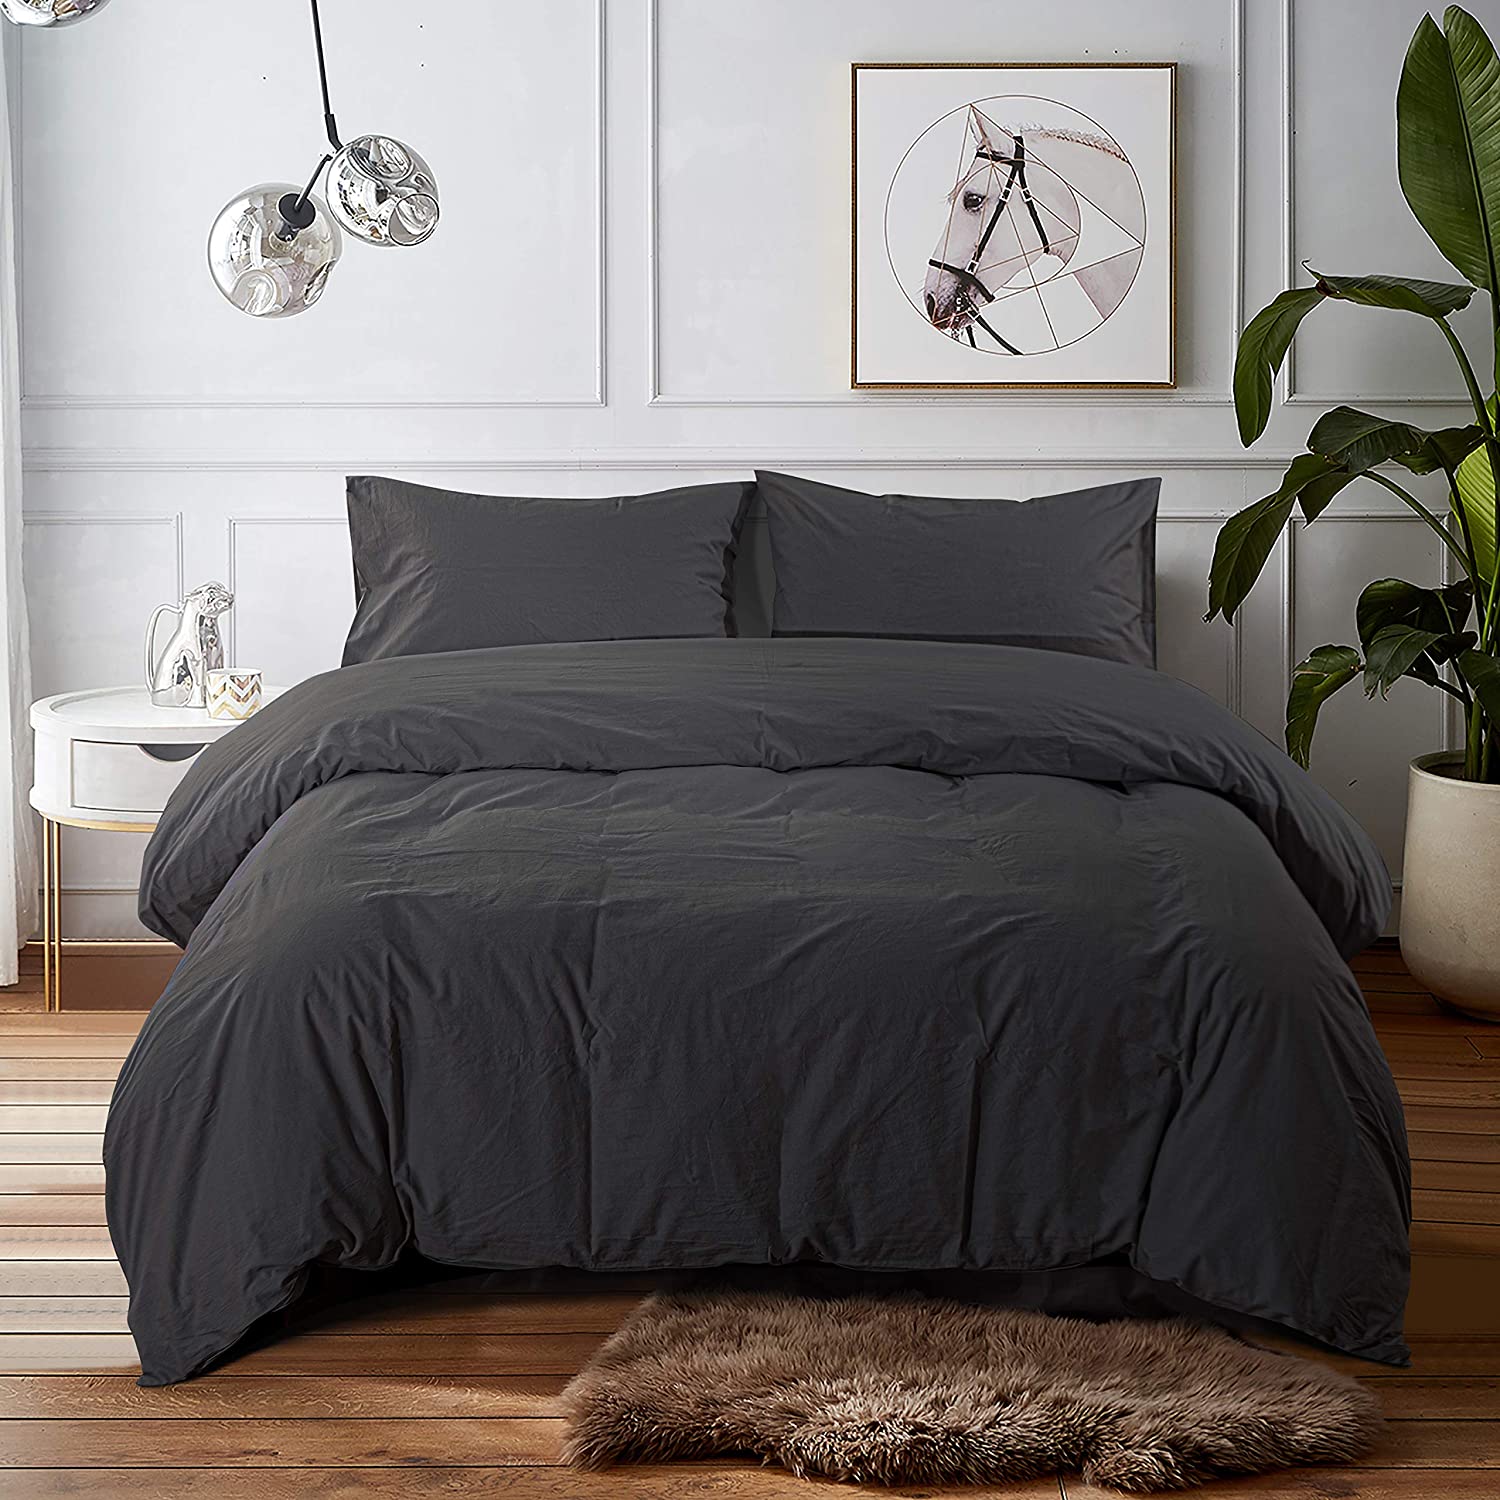 NTBAY Washed Cotton Duvet Cover Set